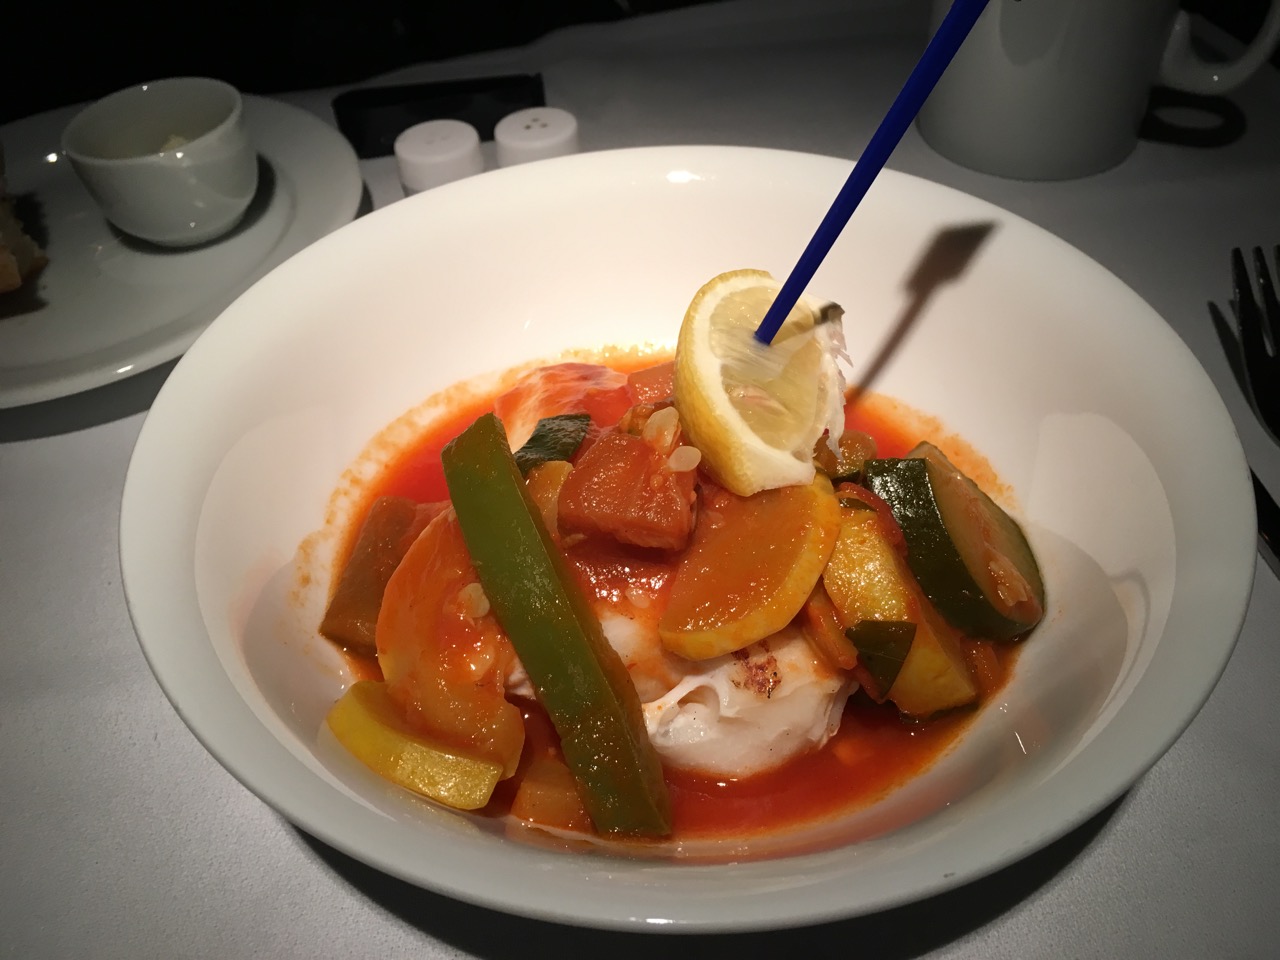 Fillet of Amazon Cod with Mixed vegetable ratatouille